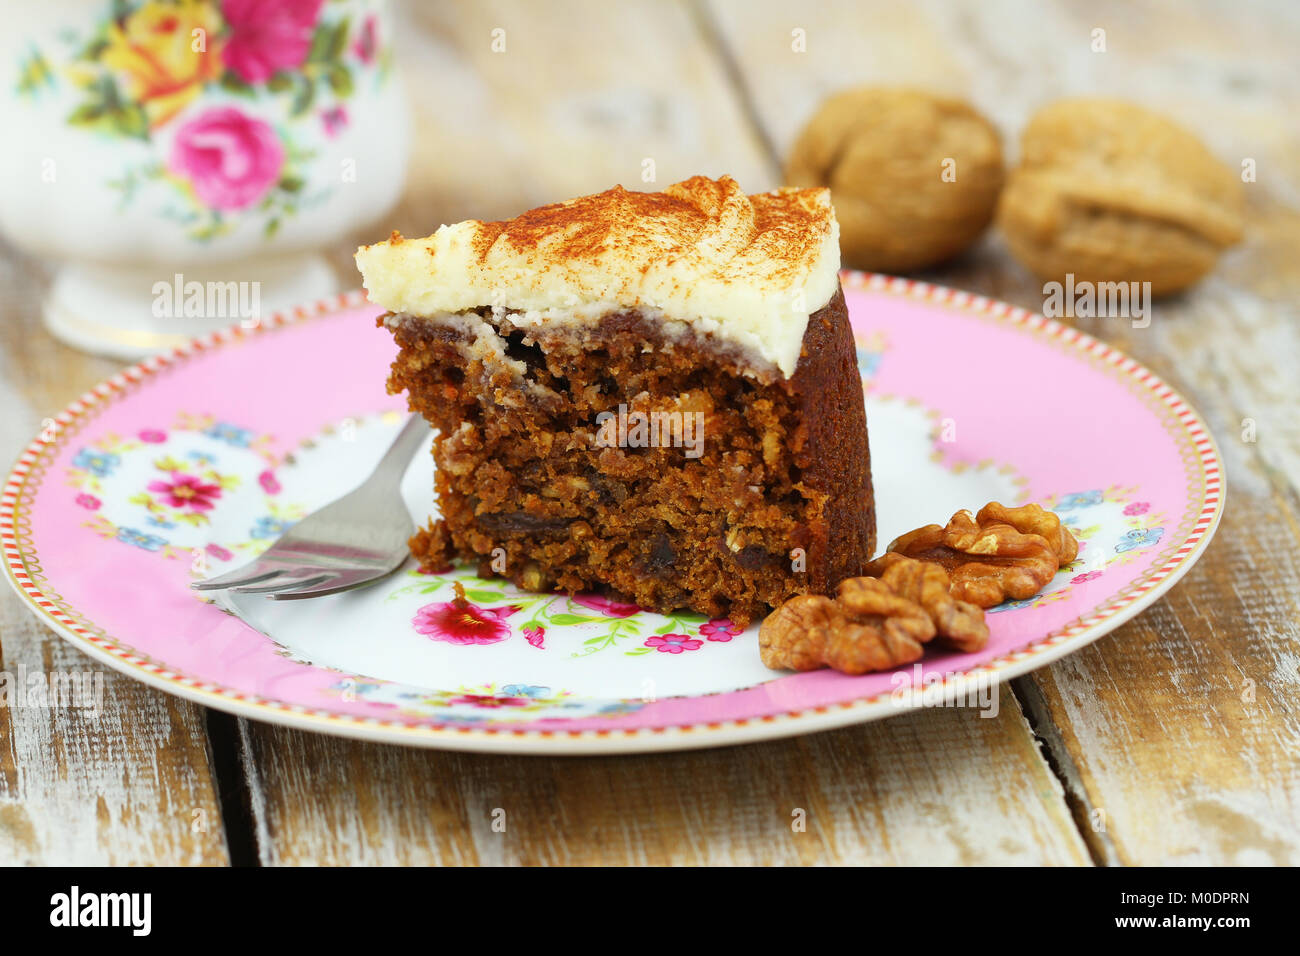 Slice of delicious carrot cake with walnuts with marzipan icing on pink plate Stock Photo